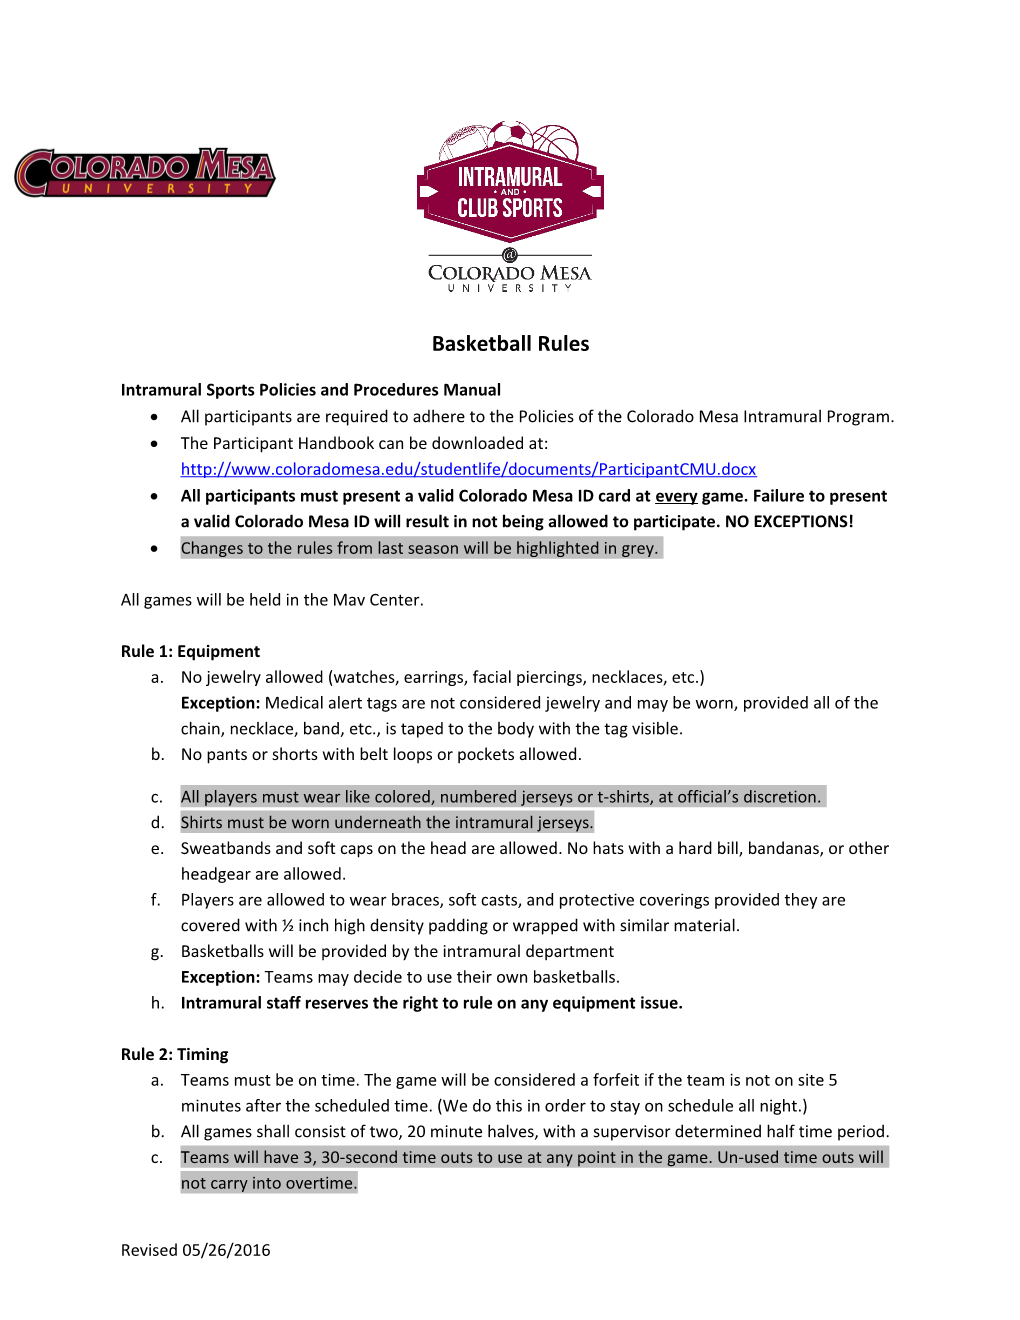 Intramural Sports Policies and Procedures Manual